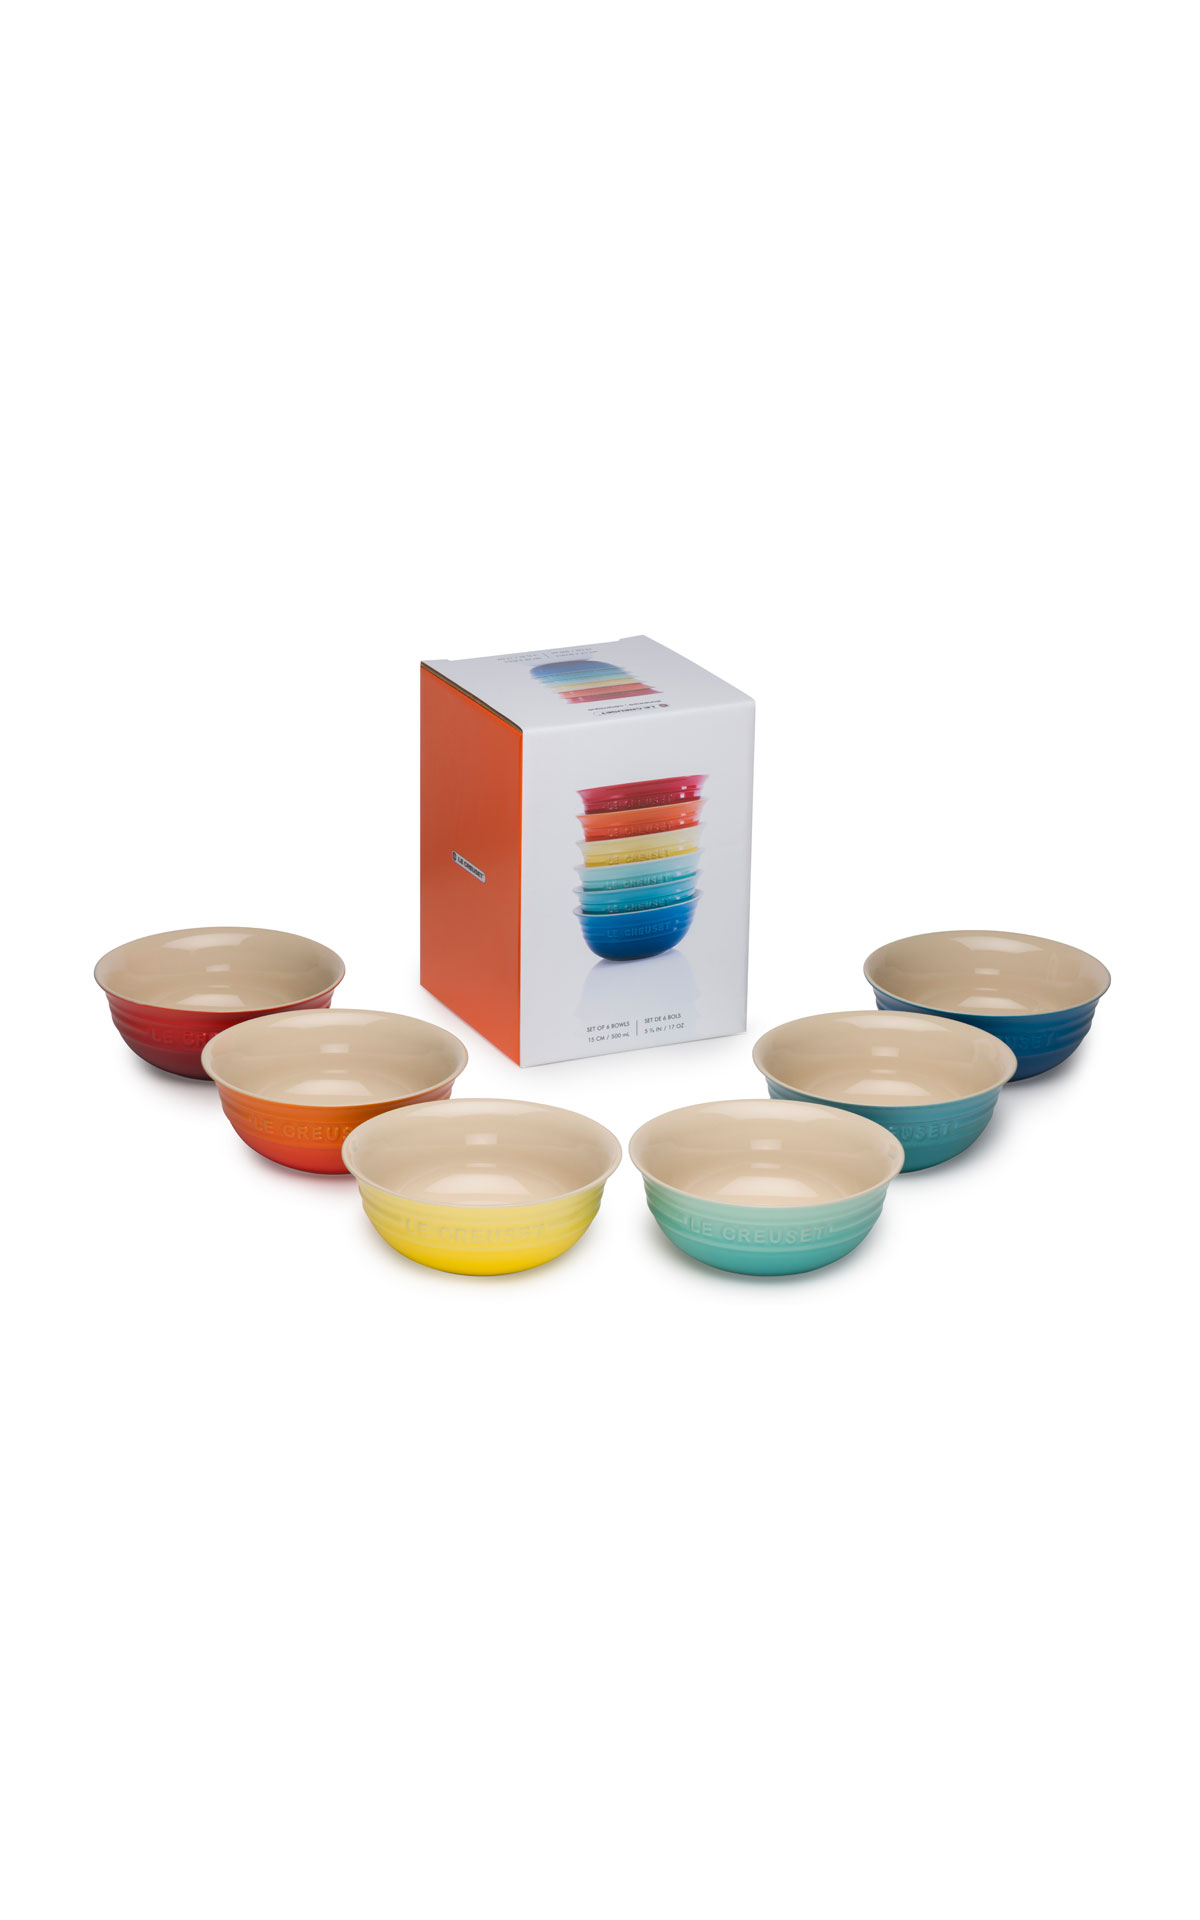 Le Creuset Set of 6 cereal bowls rainbow from Bicester Village